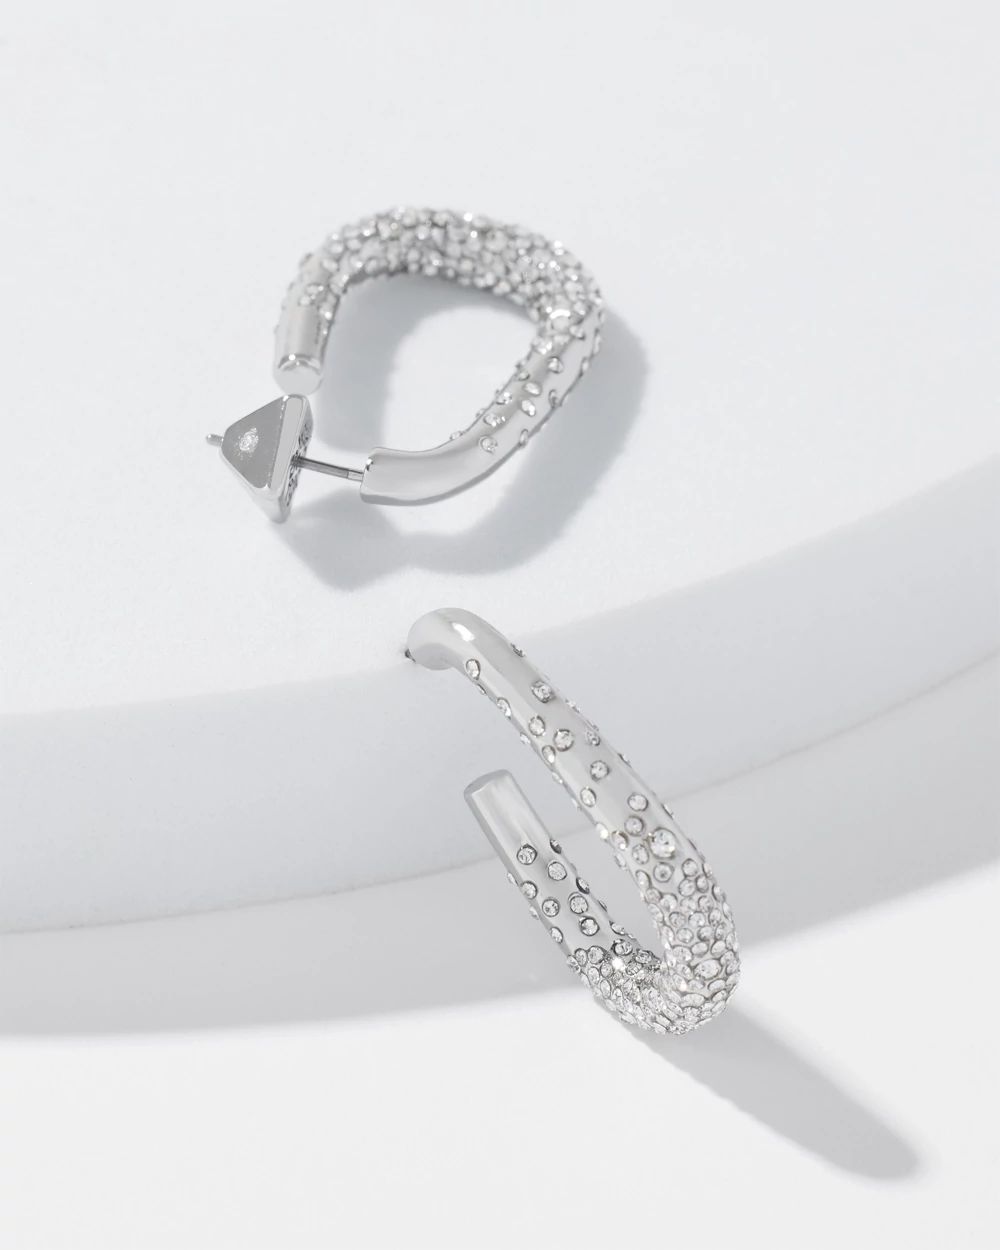 Silver Dusted Pave Hoop Earrings click to view larger image.